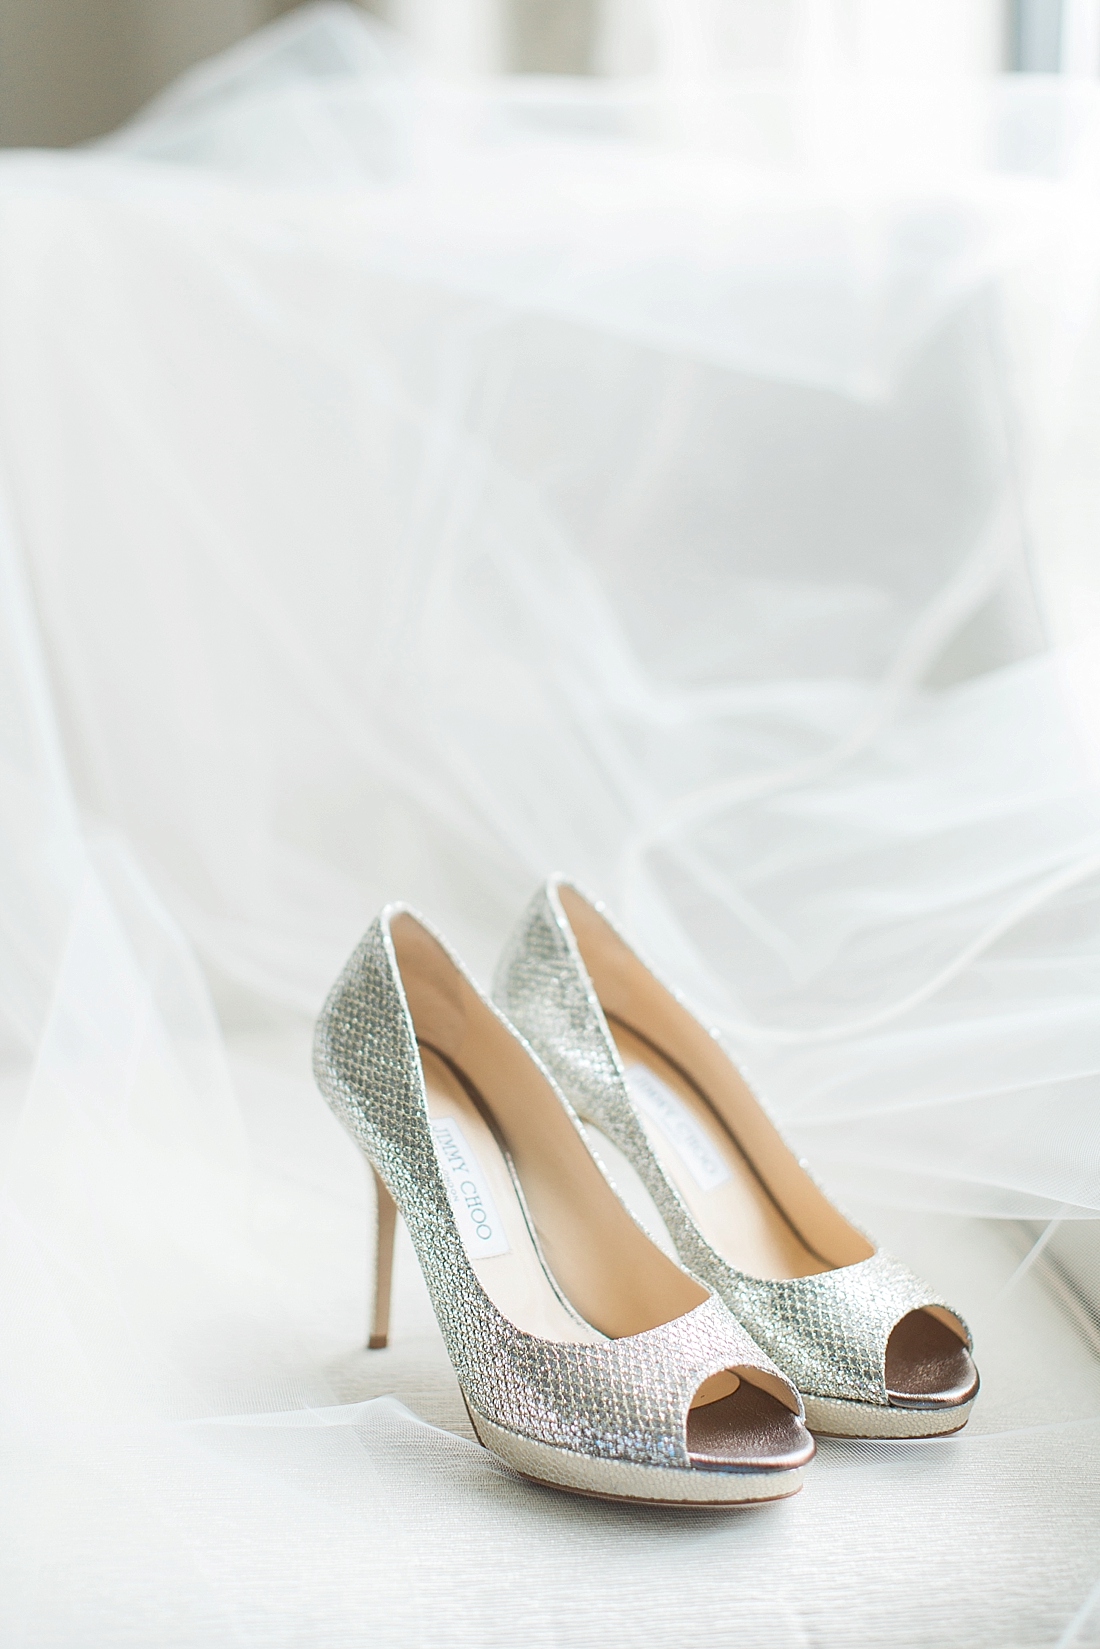 Classic Jimmy Choos silver wedding pumps | Abby Grace Photography